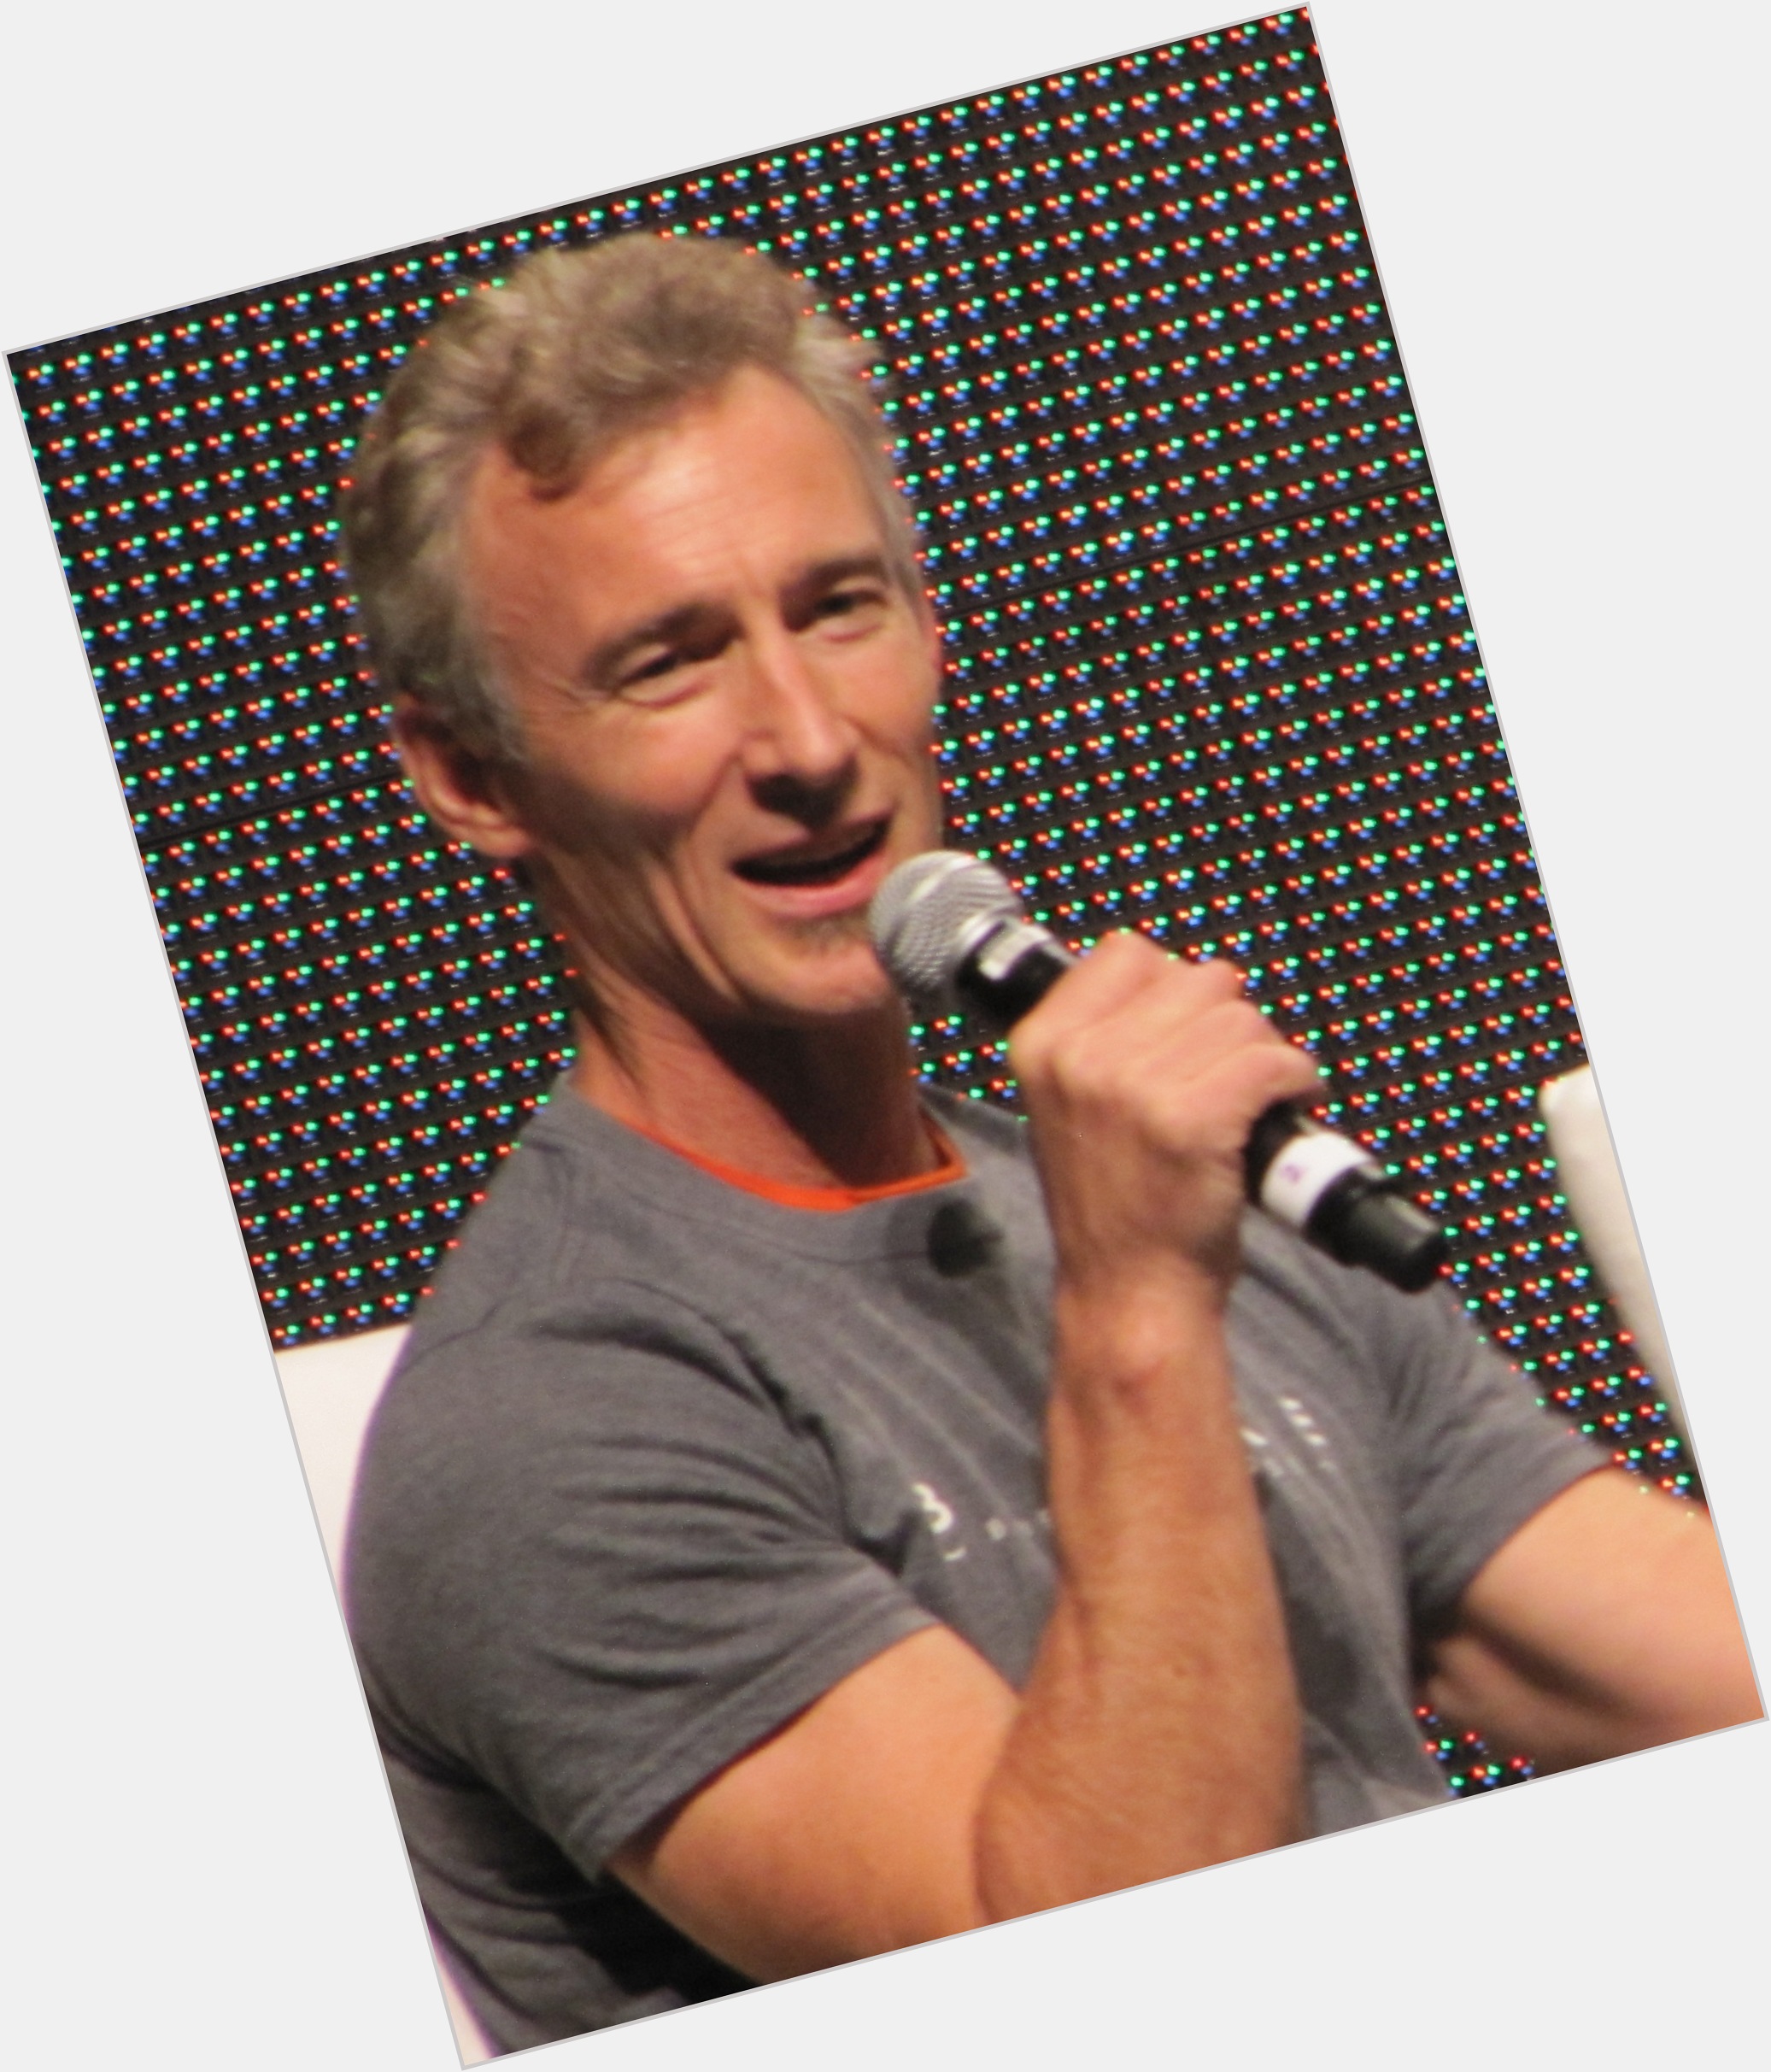 <a href="/hot-men/jed-brophy/where-dating-news-photos">Jed Brophy</a>  